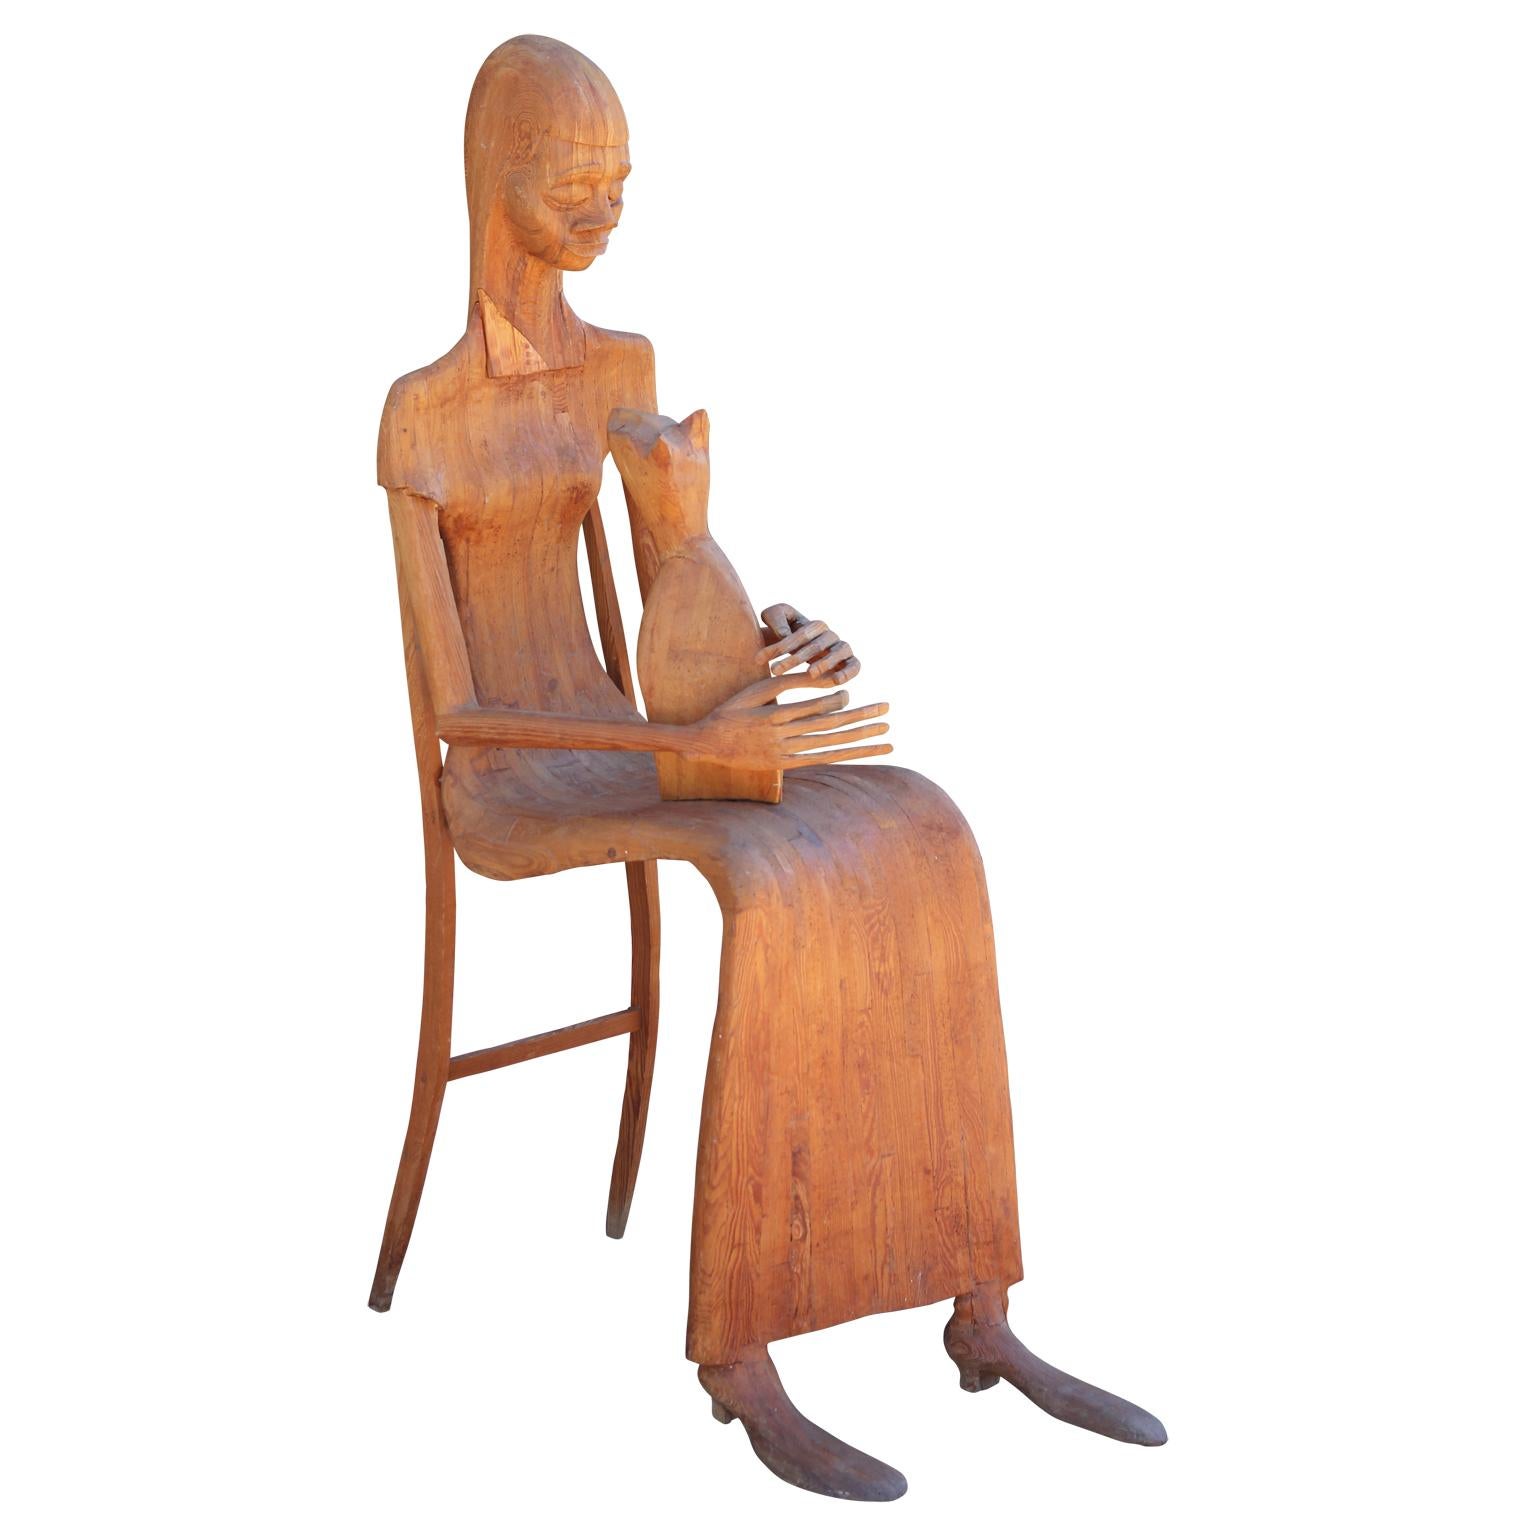 Marion Perkins Figurative Sculpture - Modern Hand Carved Wooden Folk Sculpture of a Seated Woman with a Pet Cat 